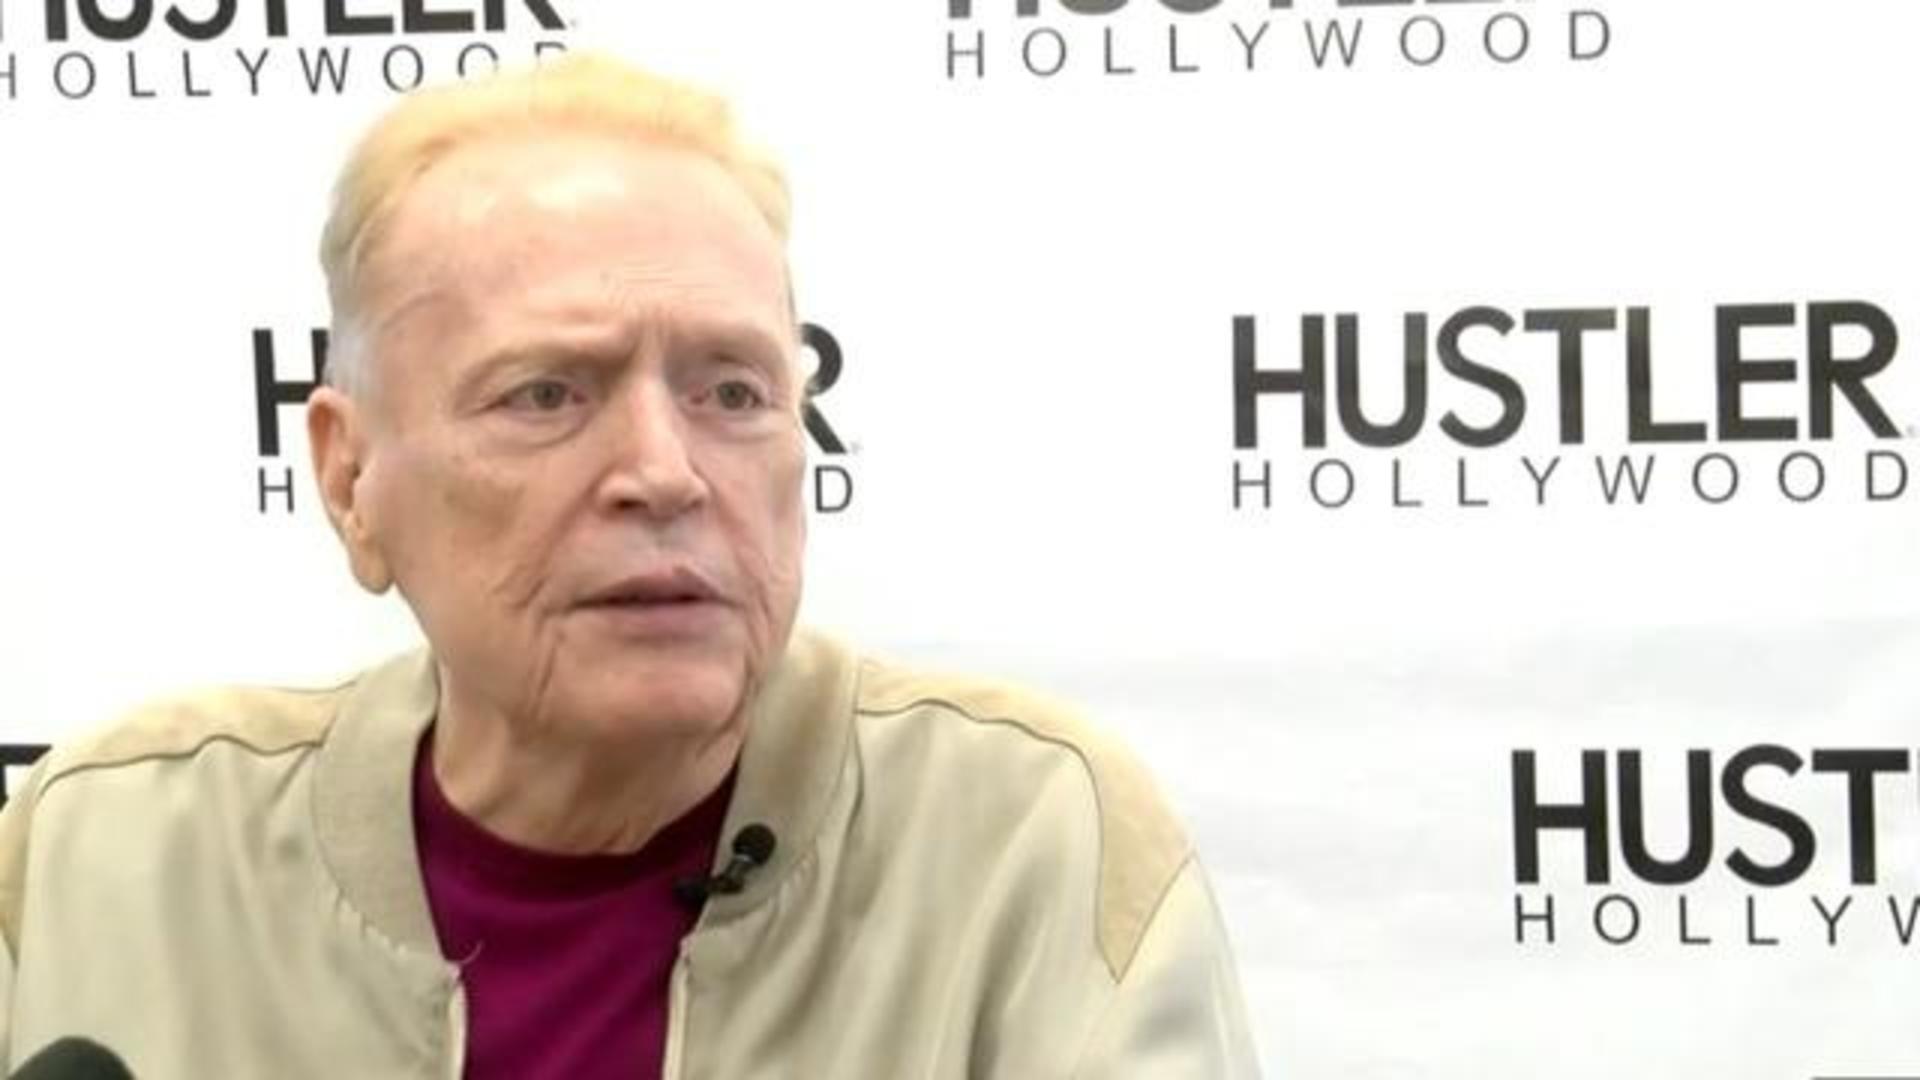 Larry Flynt Hustler Magazine Creator And First Amendment Advocate Has Died At 78 Cbs News